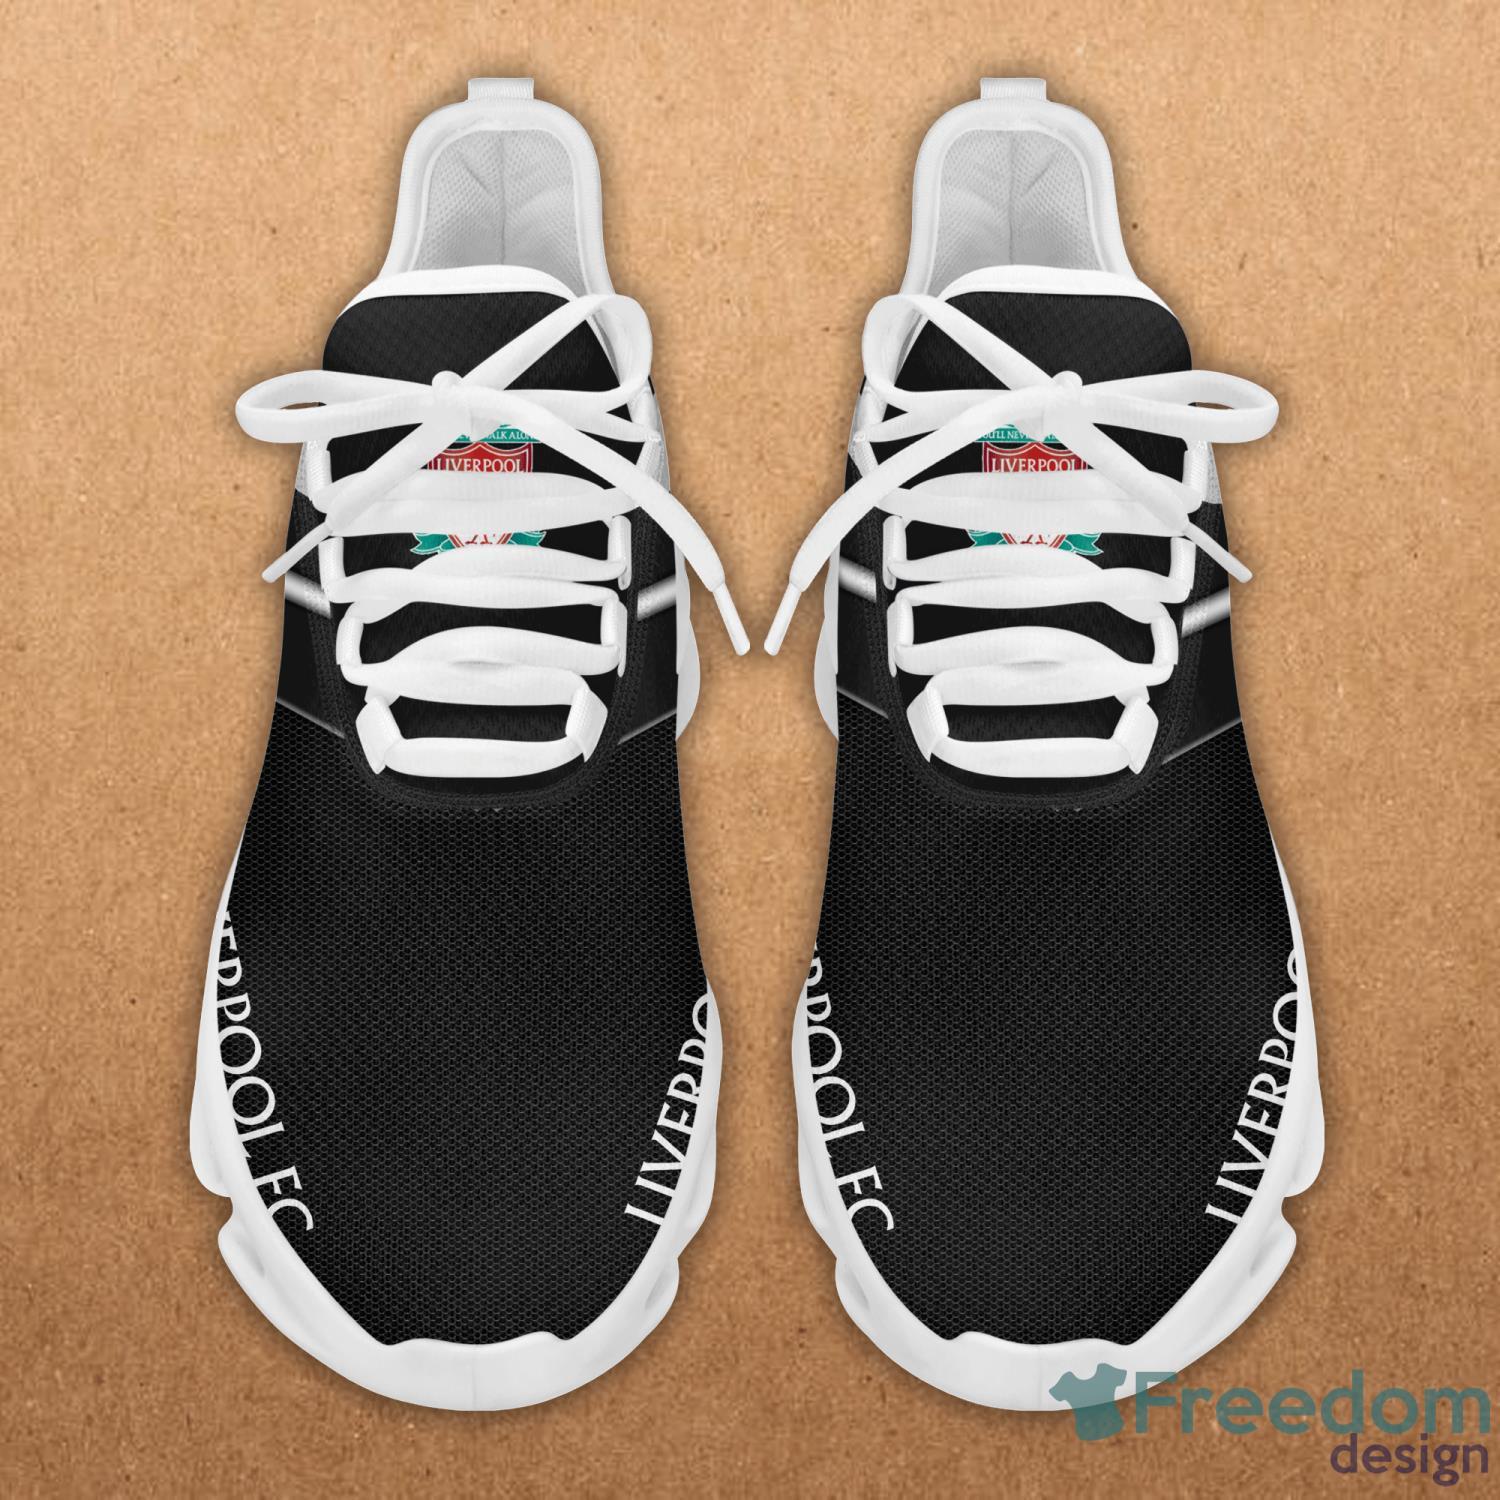 Liverpool Fc Max Soul Sneaker Running Shoes - Freedomdesign